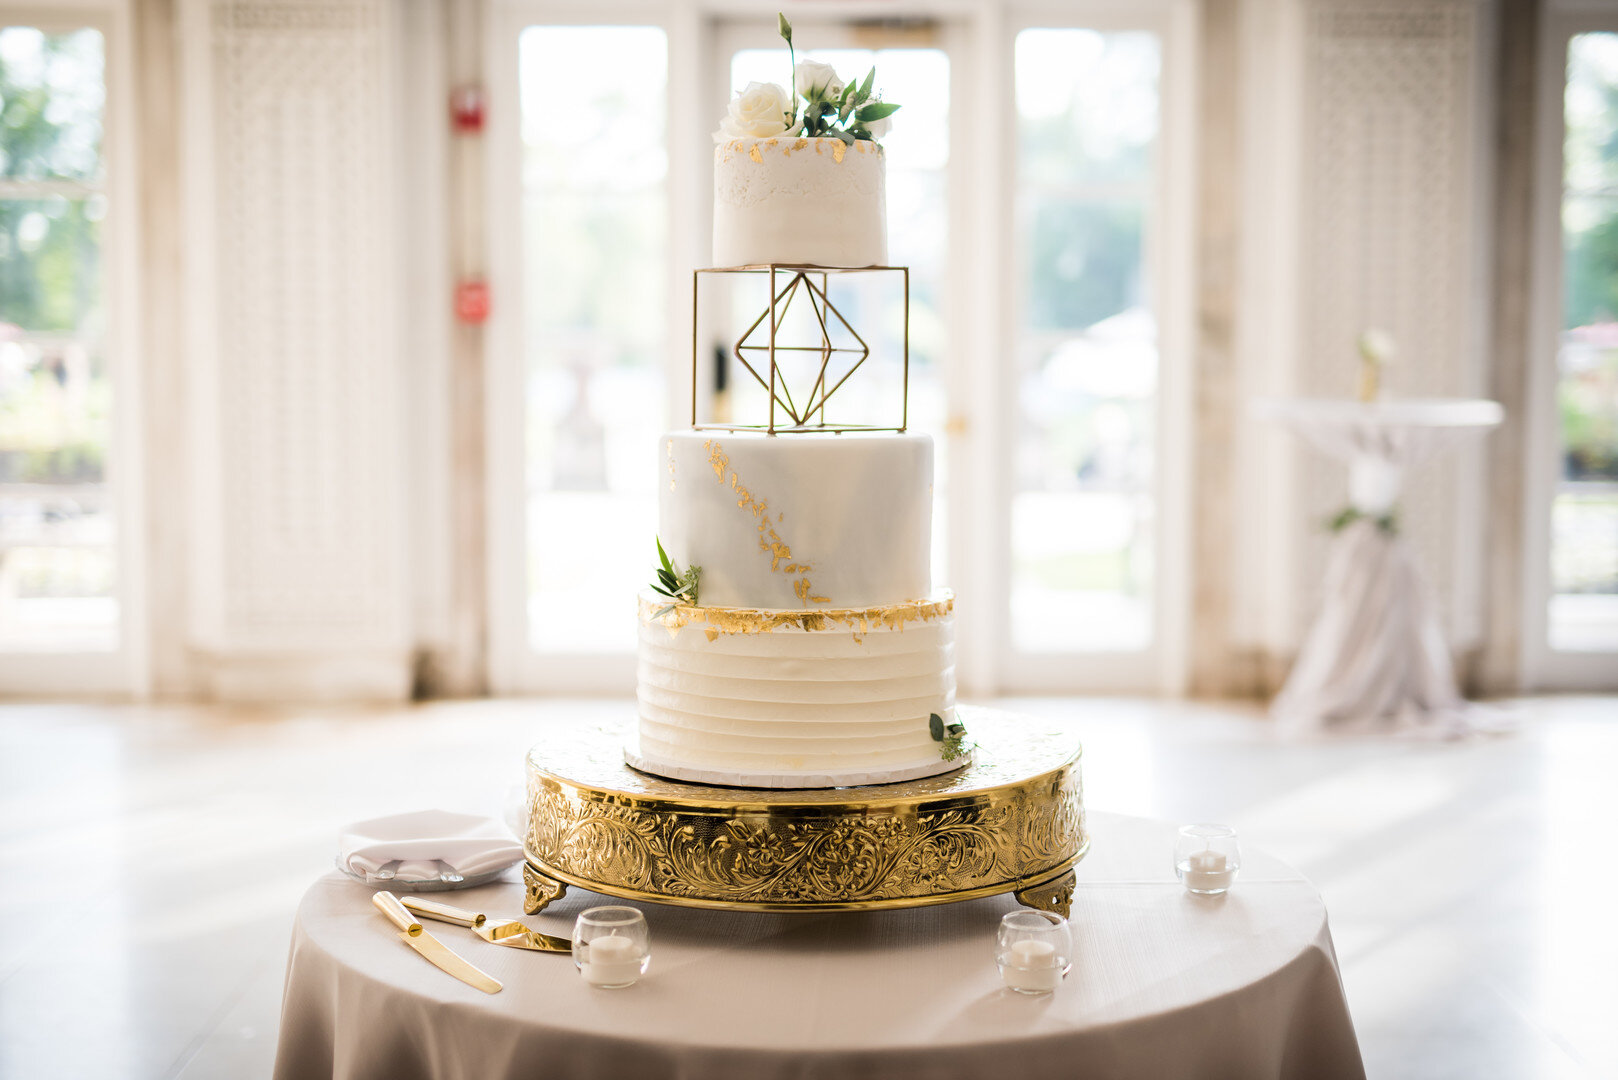 Modern Wedding Cake Design: Golden Hour Armour House Chicago Wedding captured by Inspired Eye Photography featured on CHI thee WED. Find more wedding ideas at CHItheeWED.com!